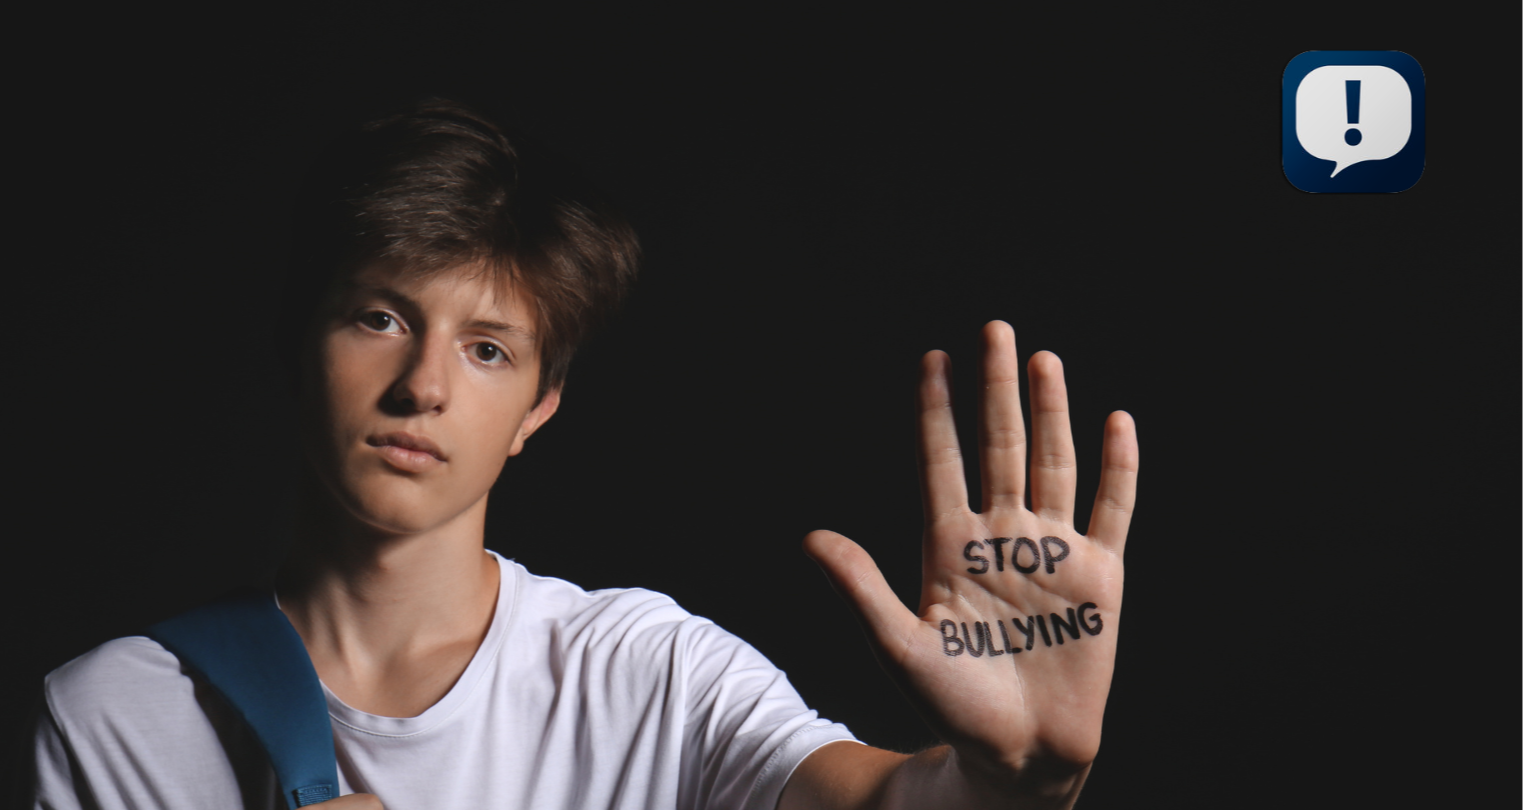 boy holding up his hand and on his palm it says "Stop Bullying"